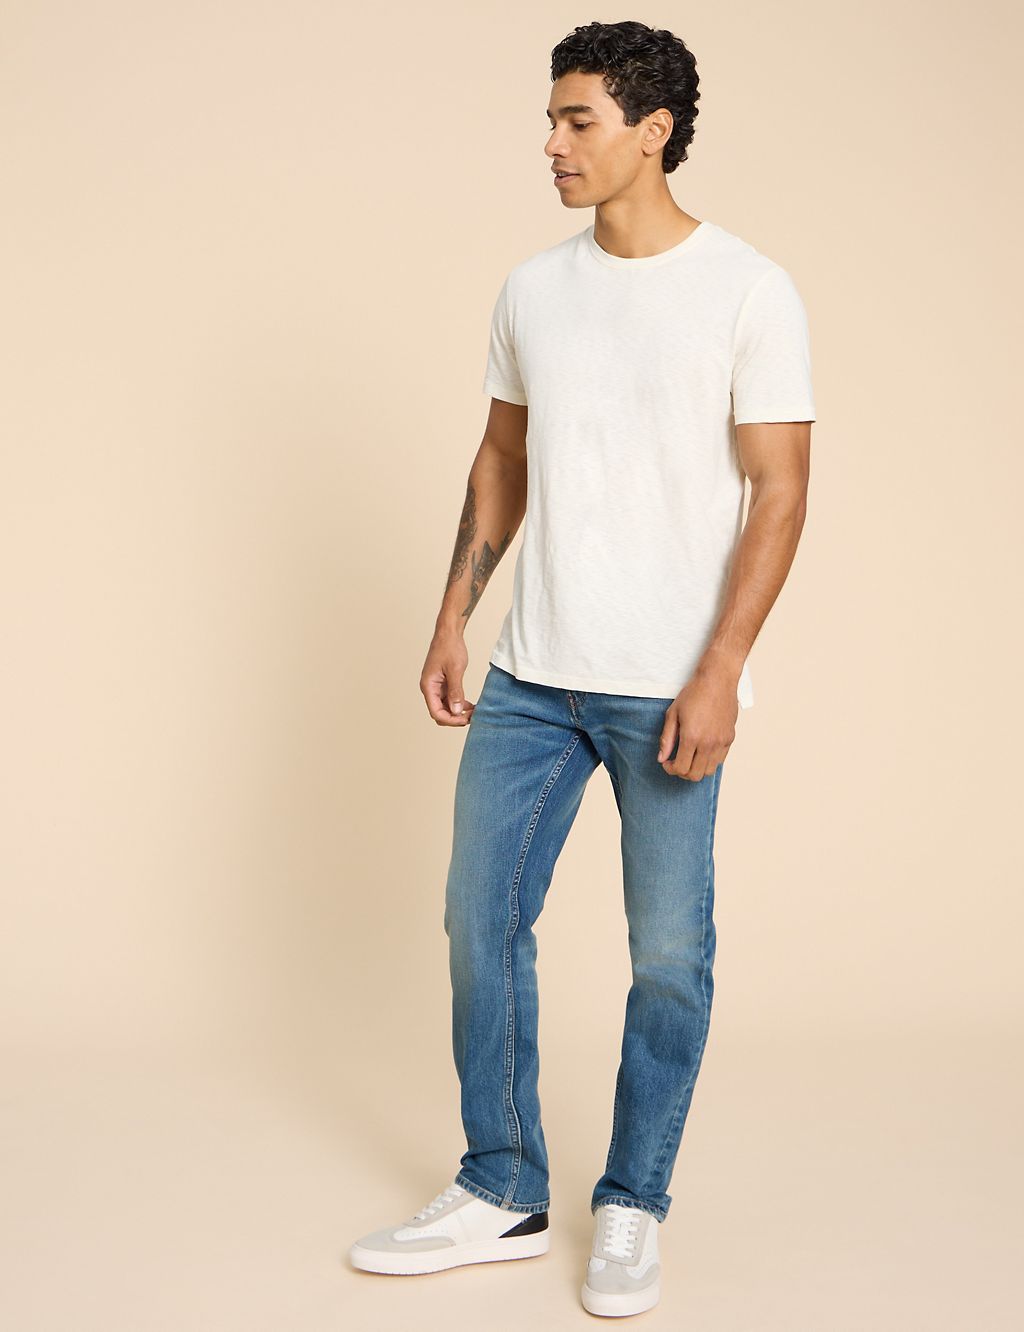 Straight Fit 5 Pocket Jeans 3 of 6